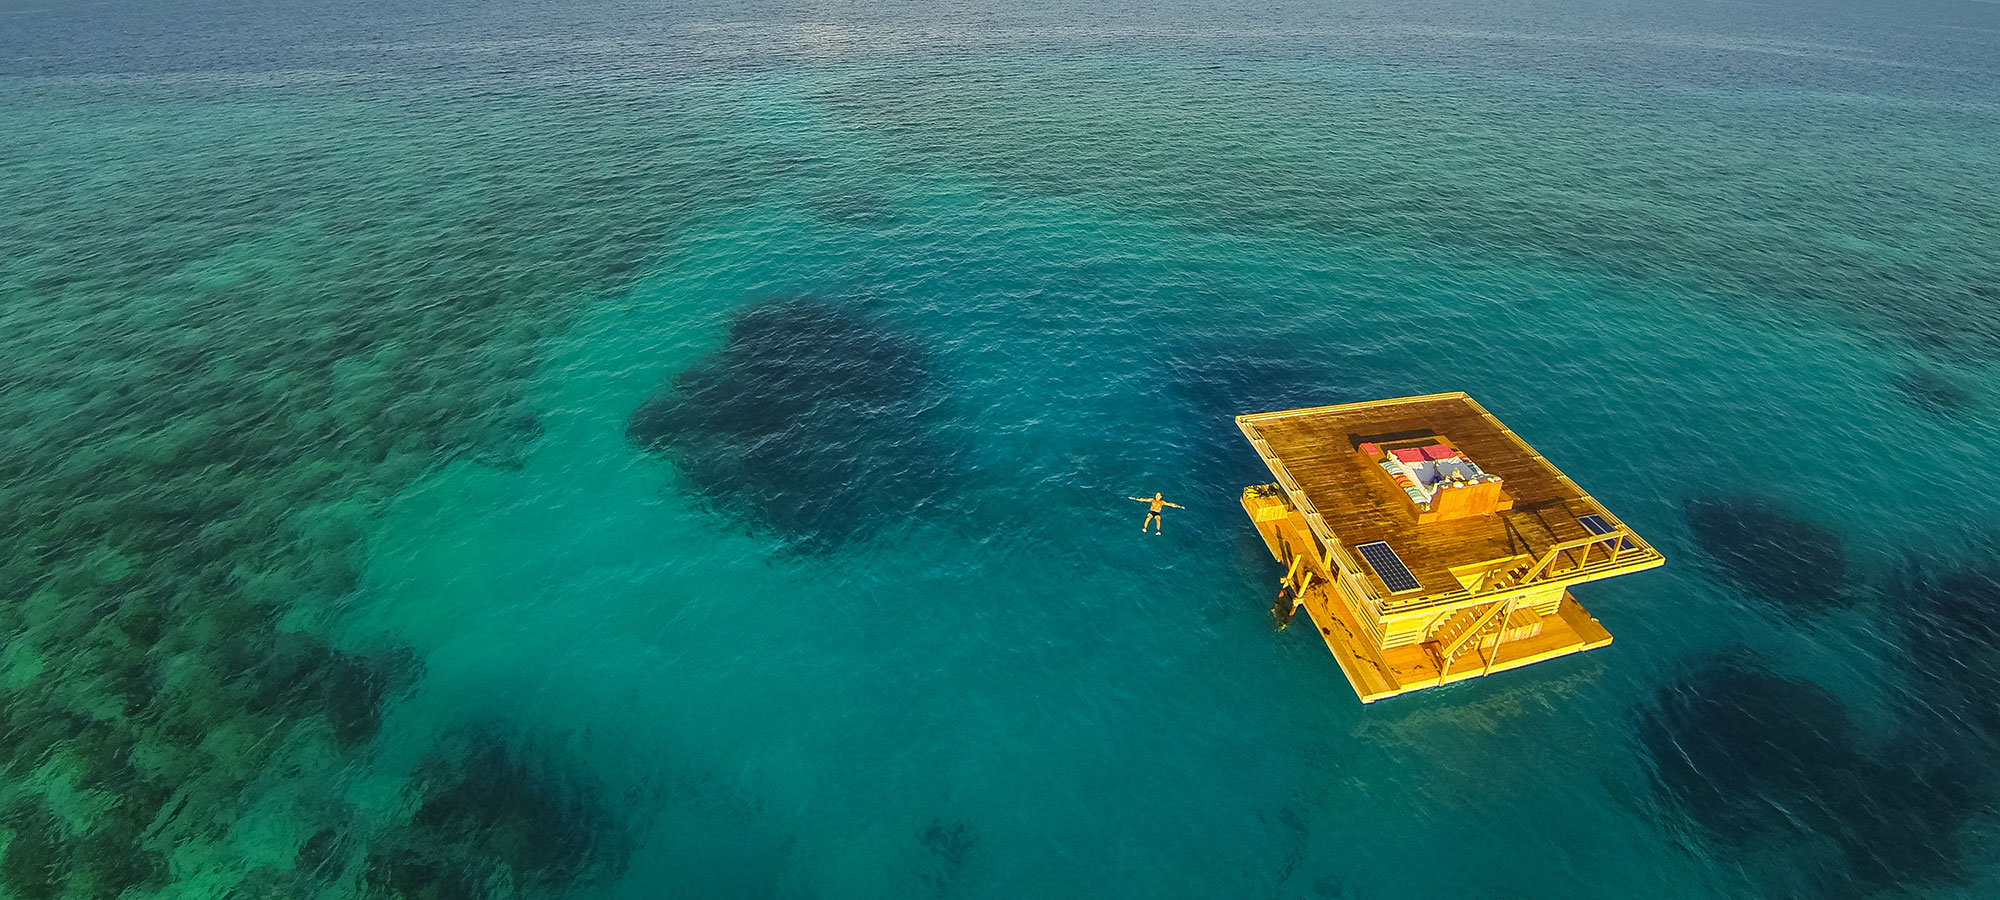 At the Manta Resort, located on Pemba Island off Africa’s east coast, you can stay overwater and sleep underwater.